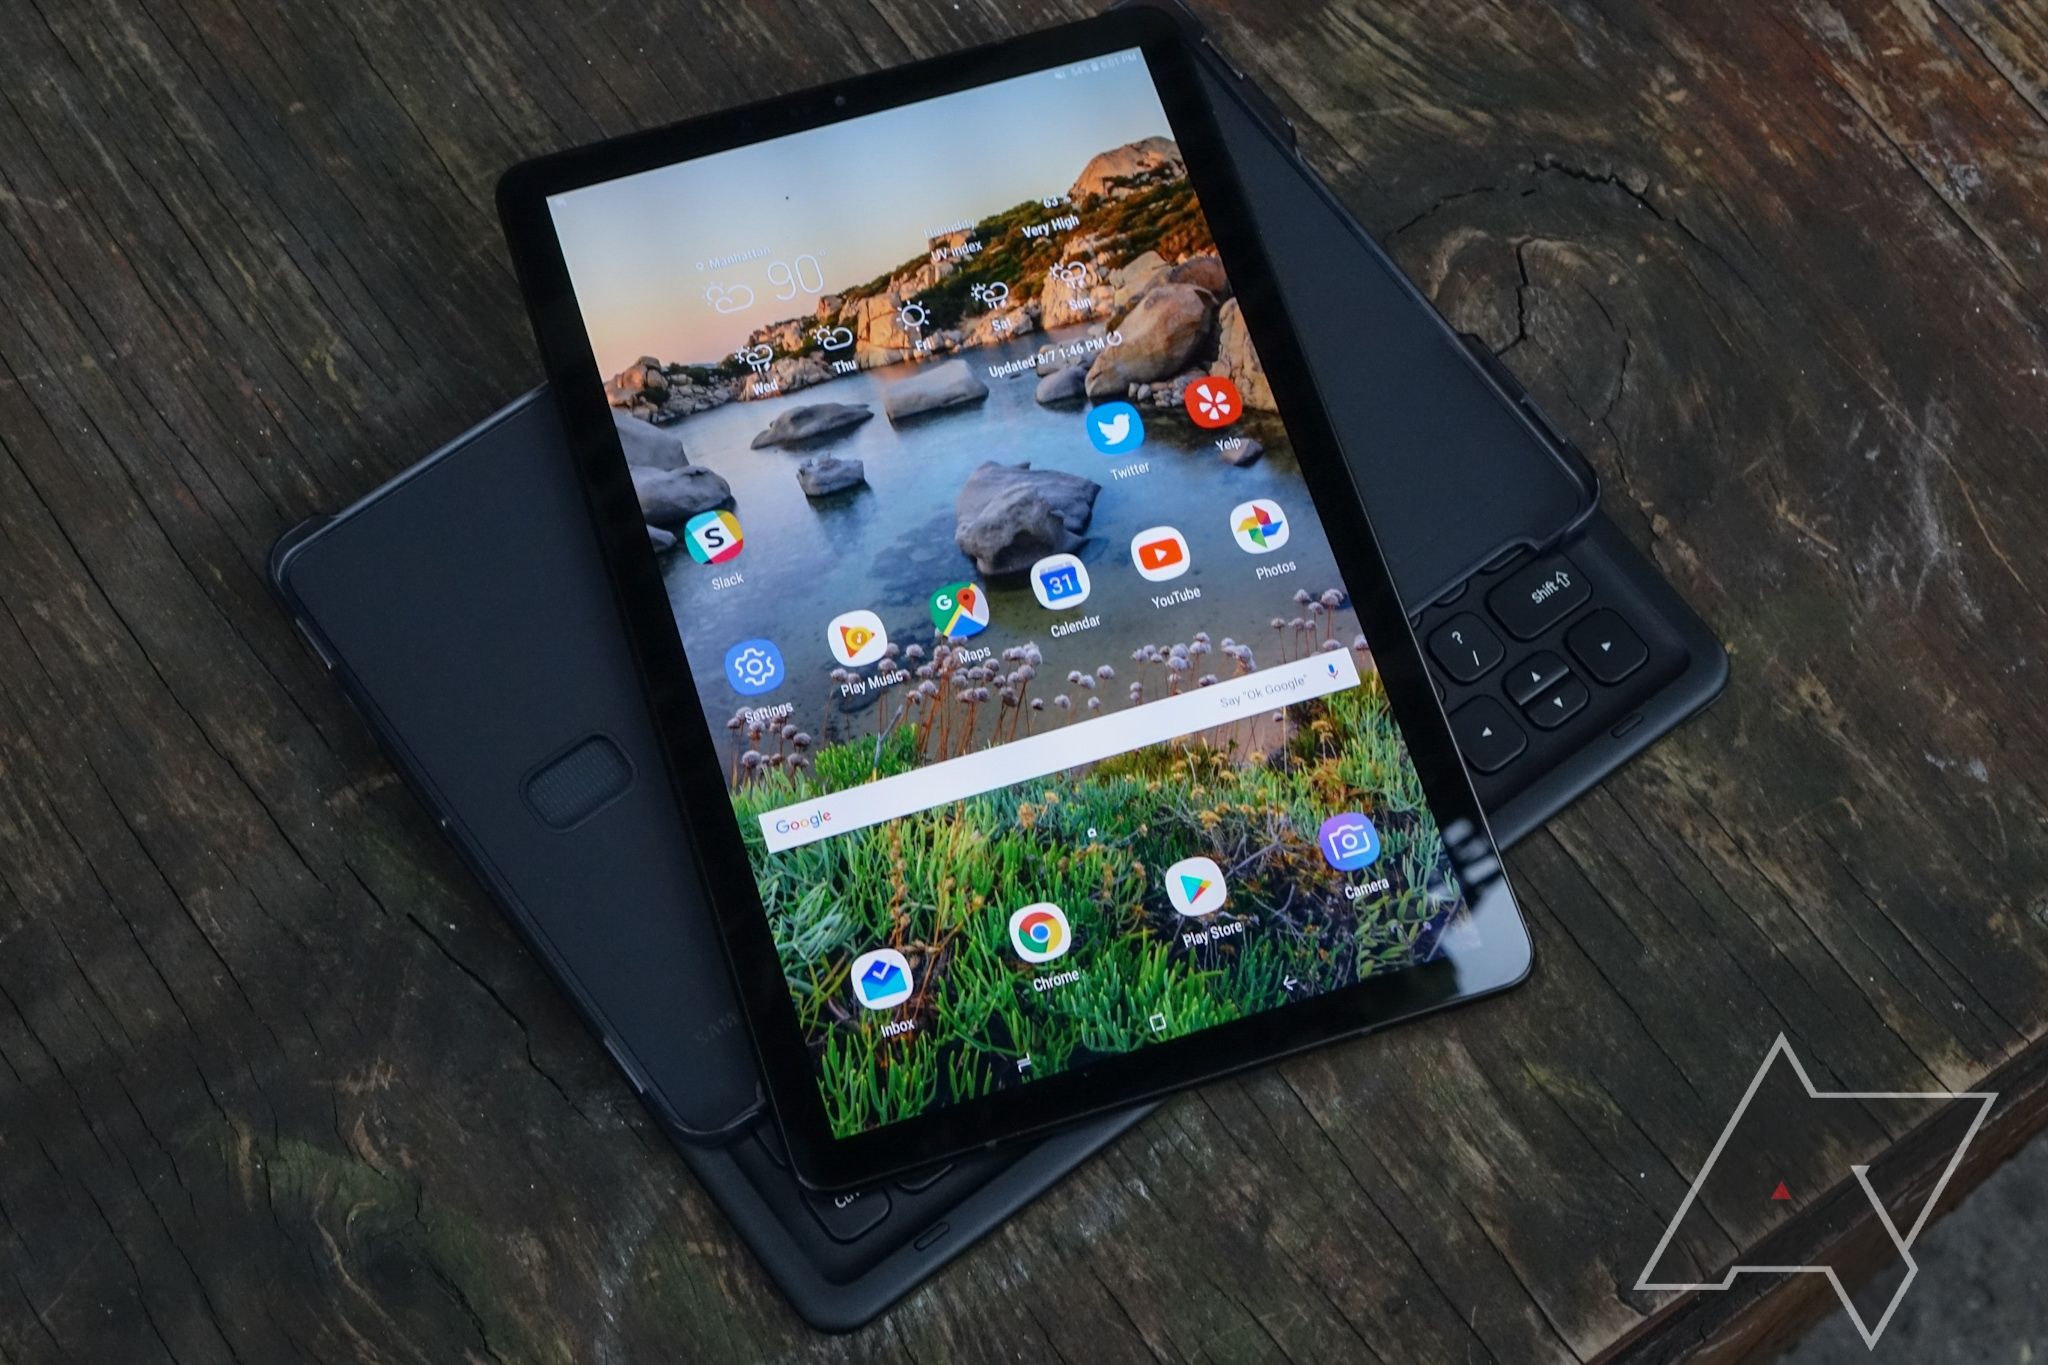 Galaxy Tab S4 An overpriced that also a horrible